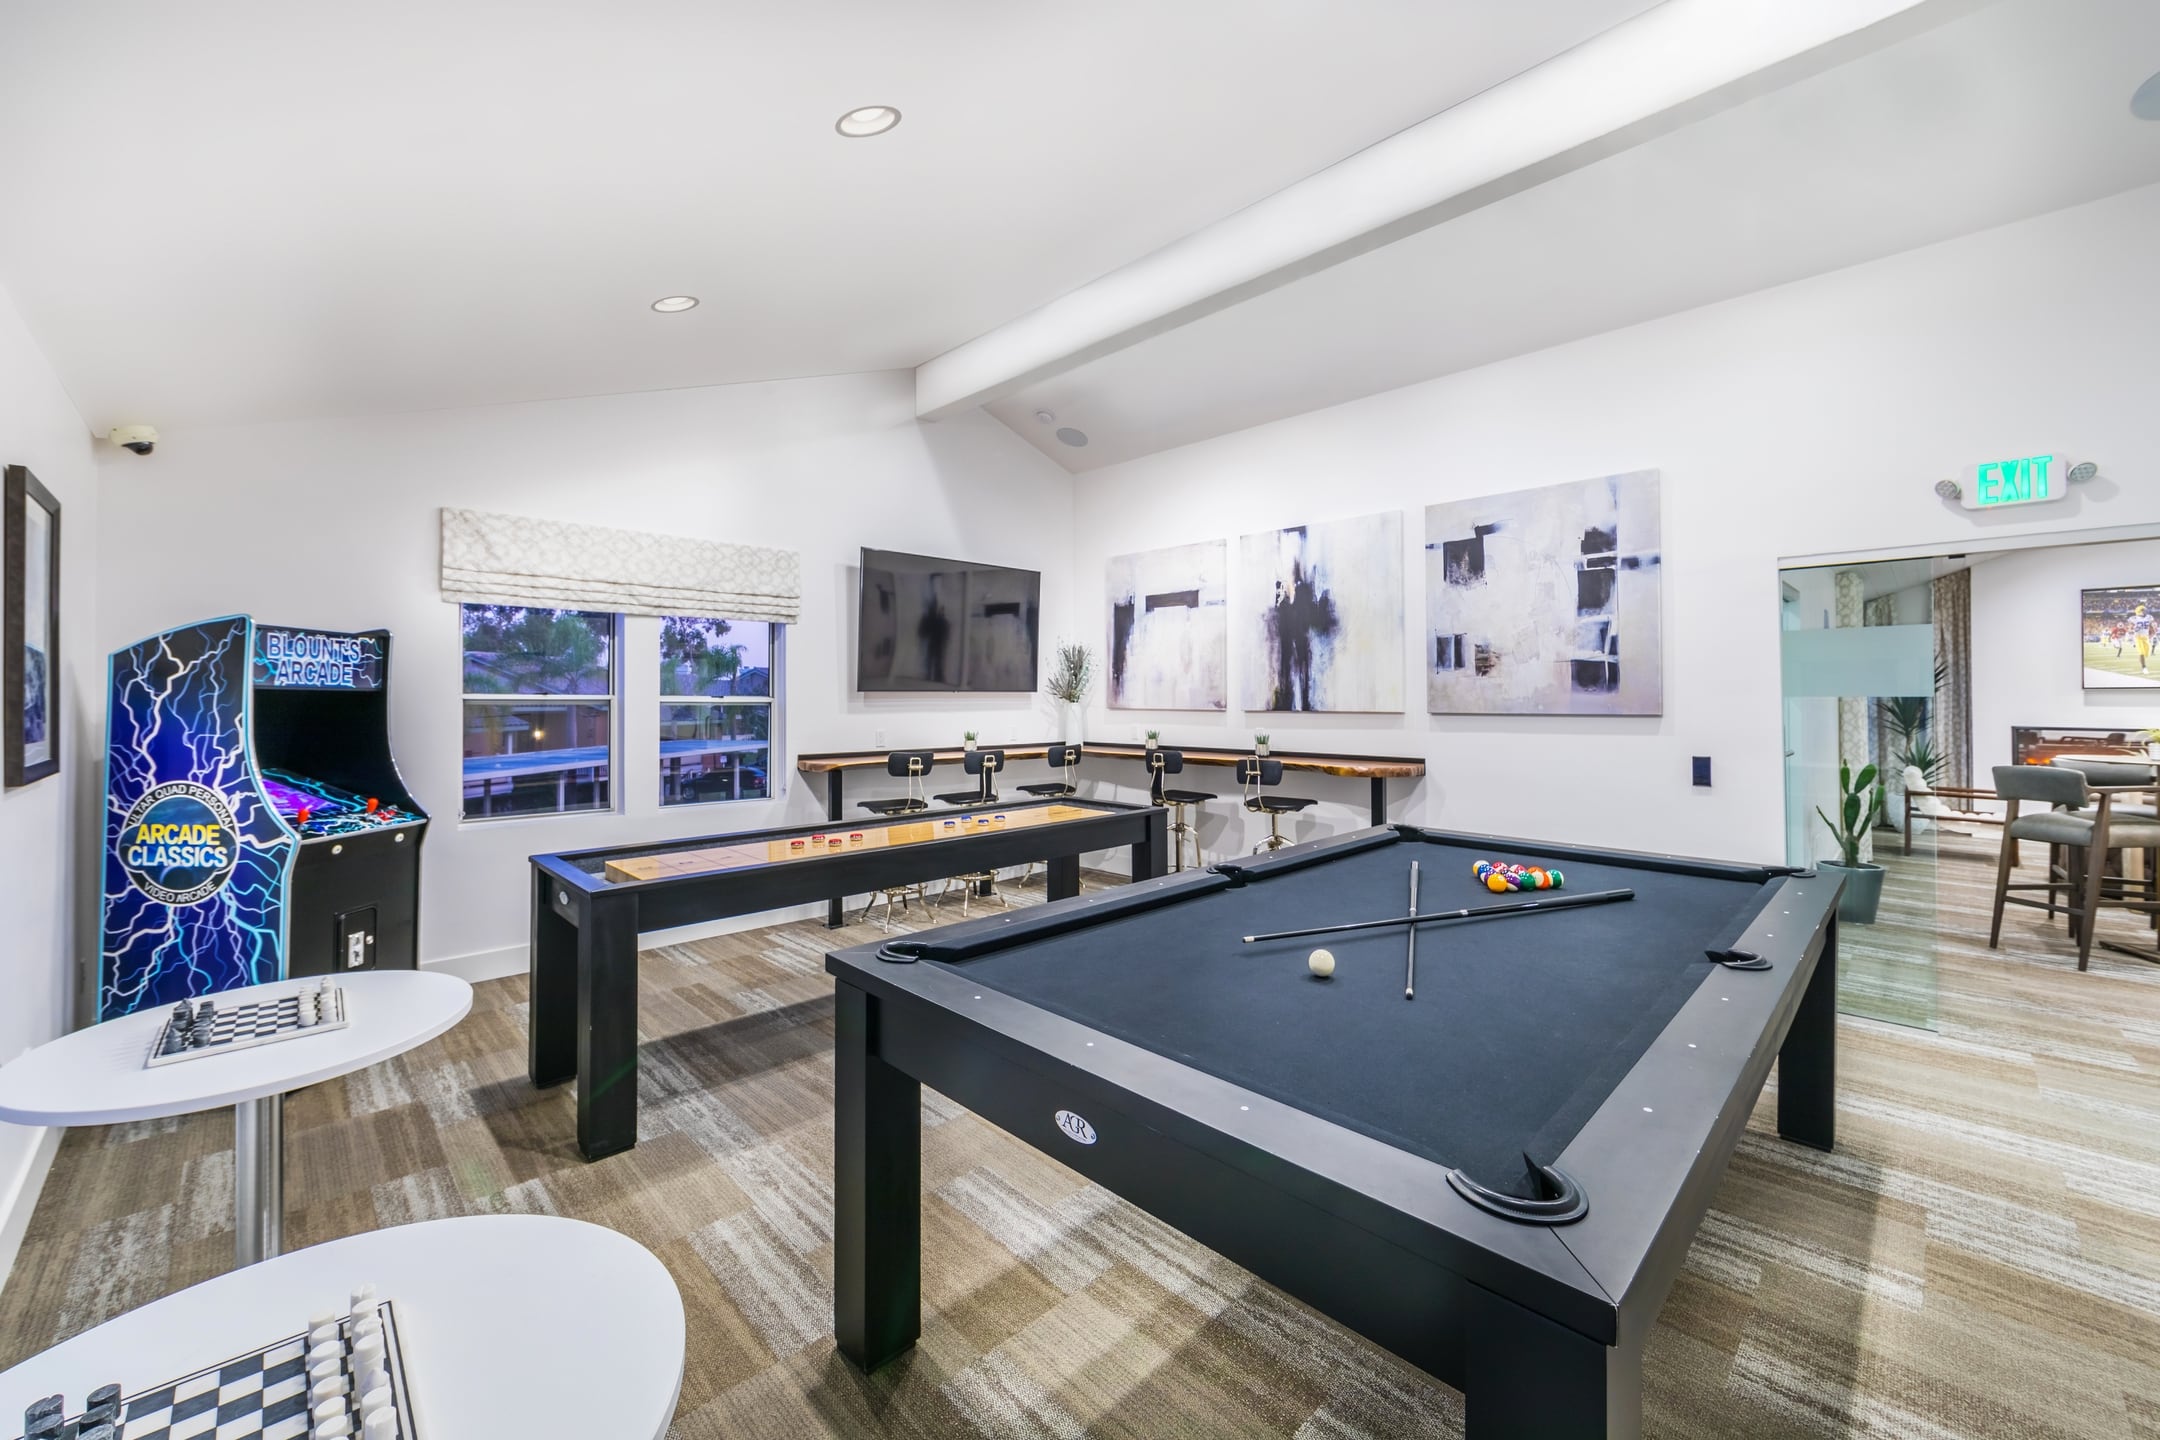 Clubhouse with pool table